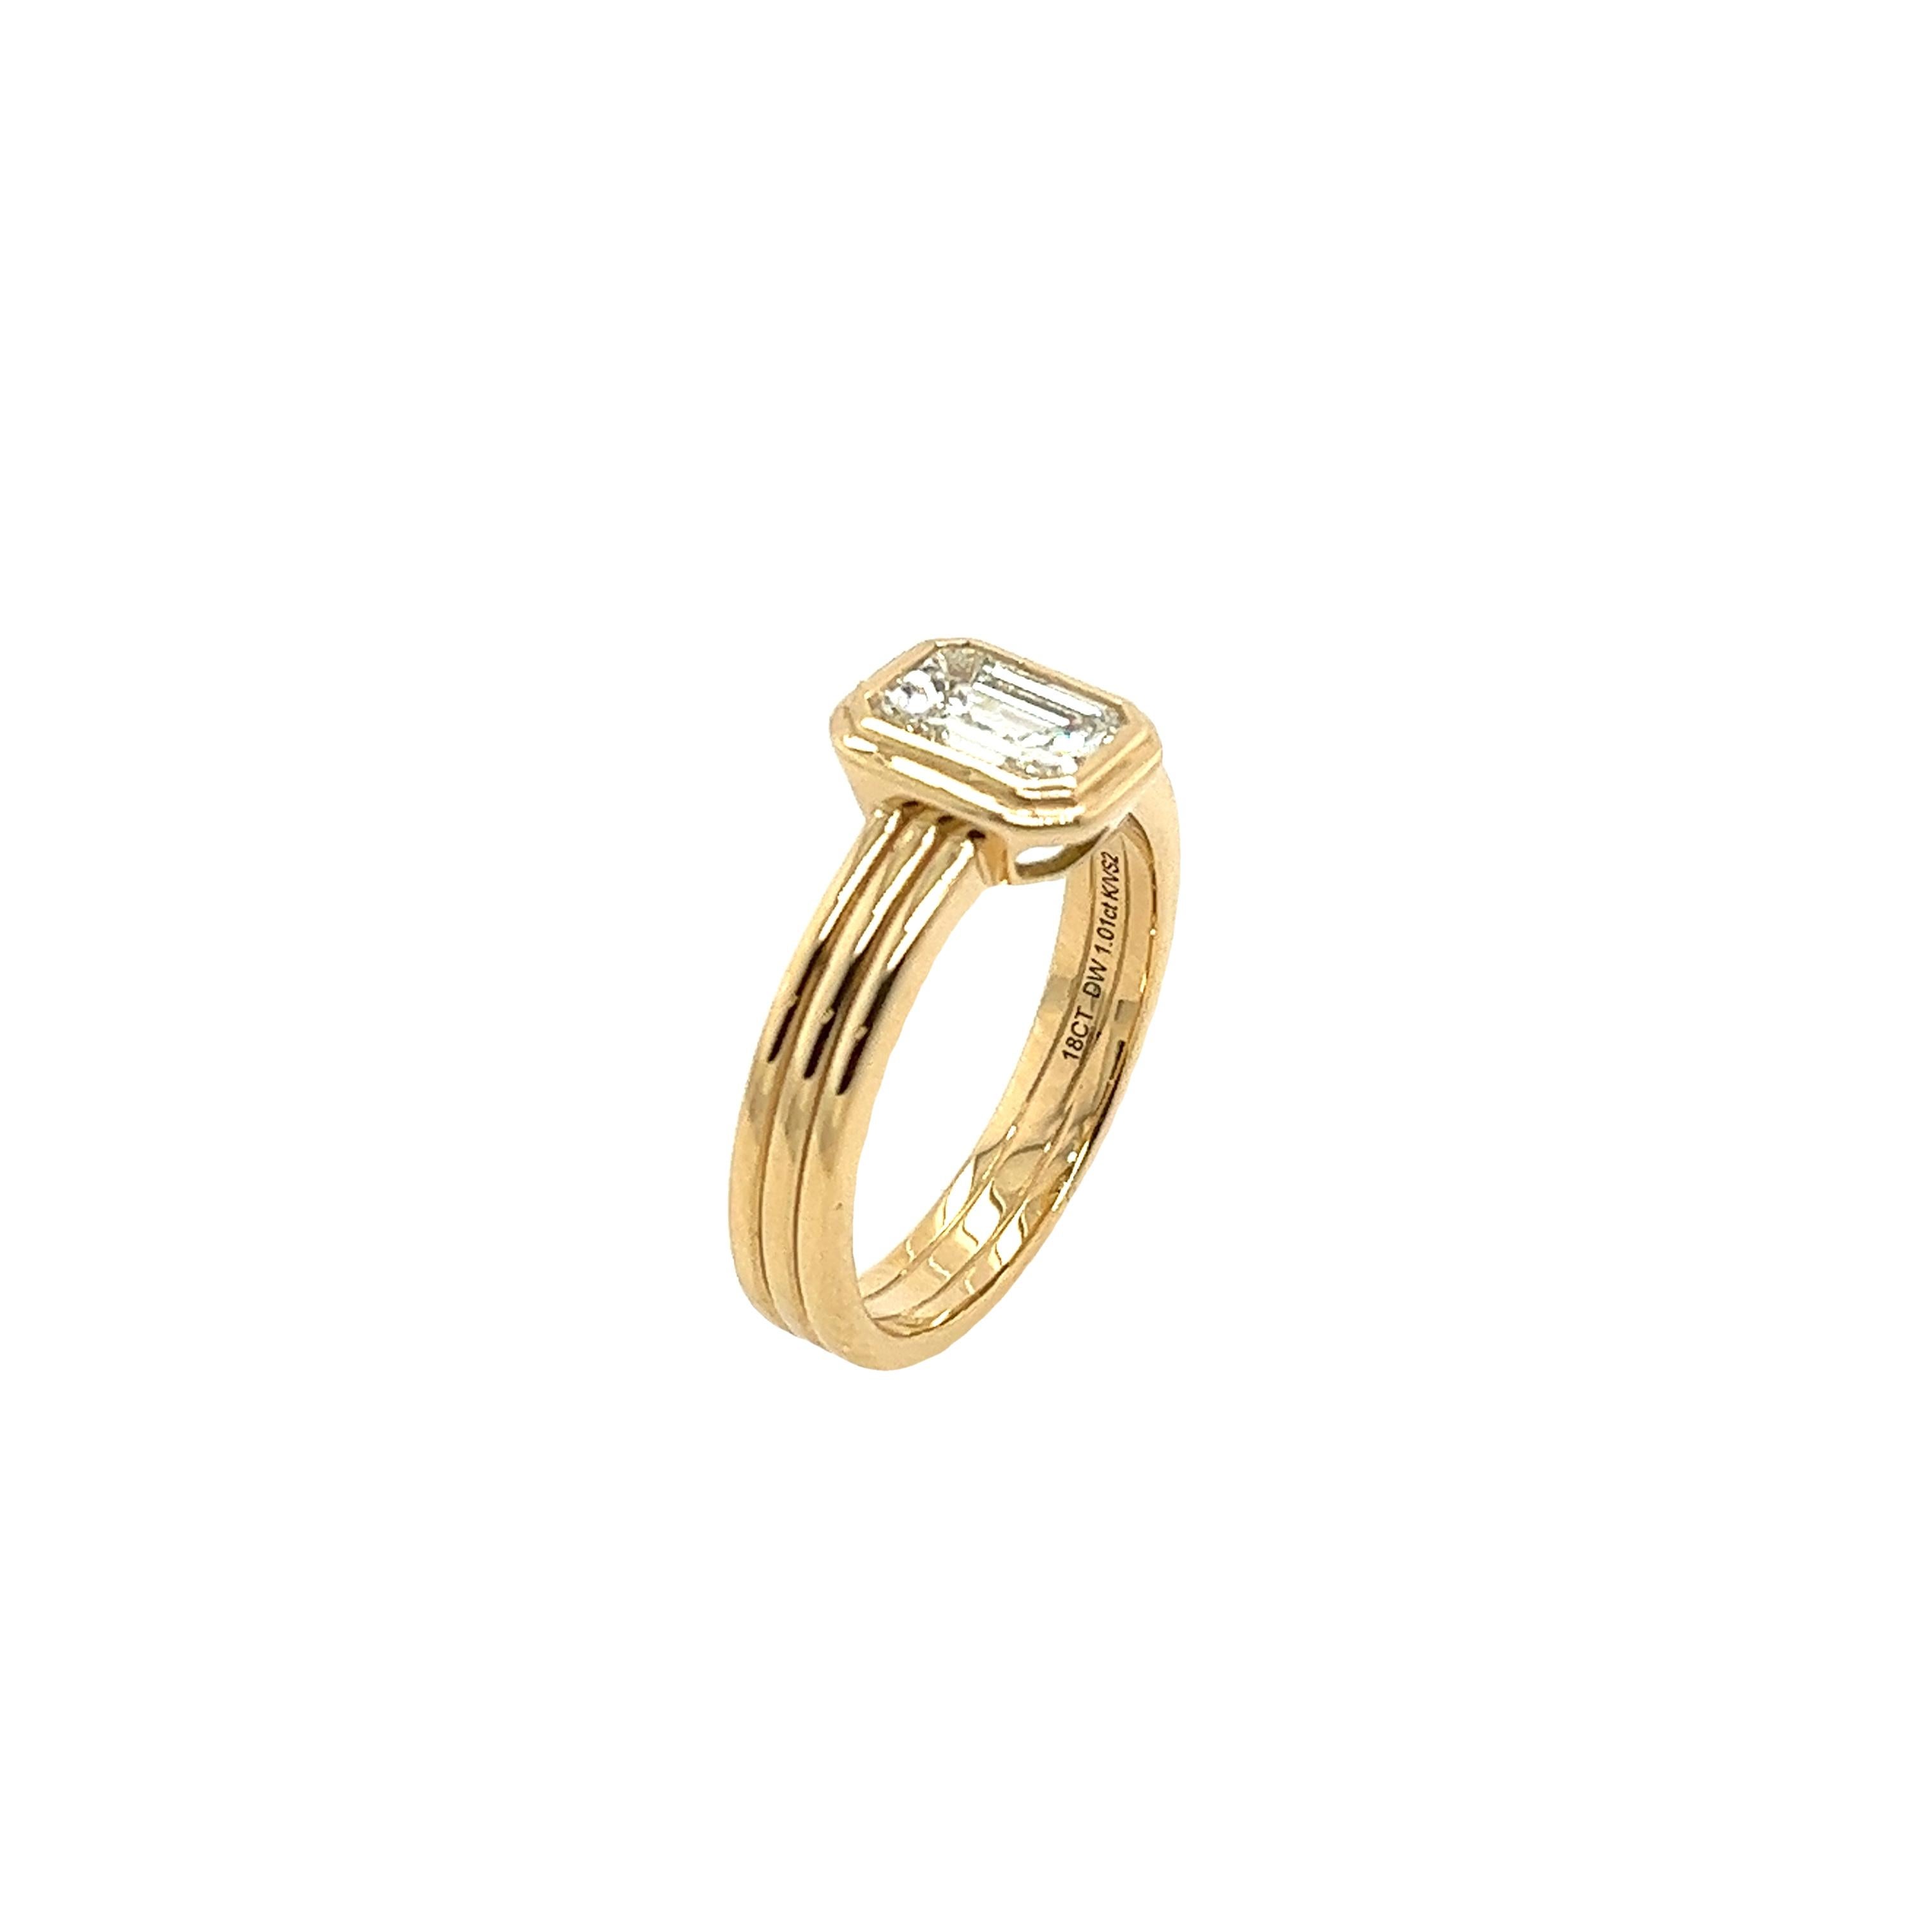 Diamond Solitaire Ring Set With 1.01ct K/VS2 Emerald Cut Diamond, In 18ct Gold In New Condition For Sale In London, GB